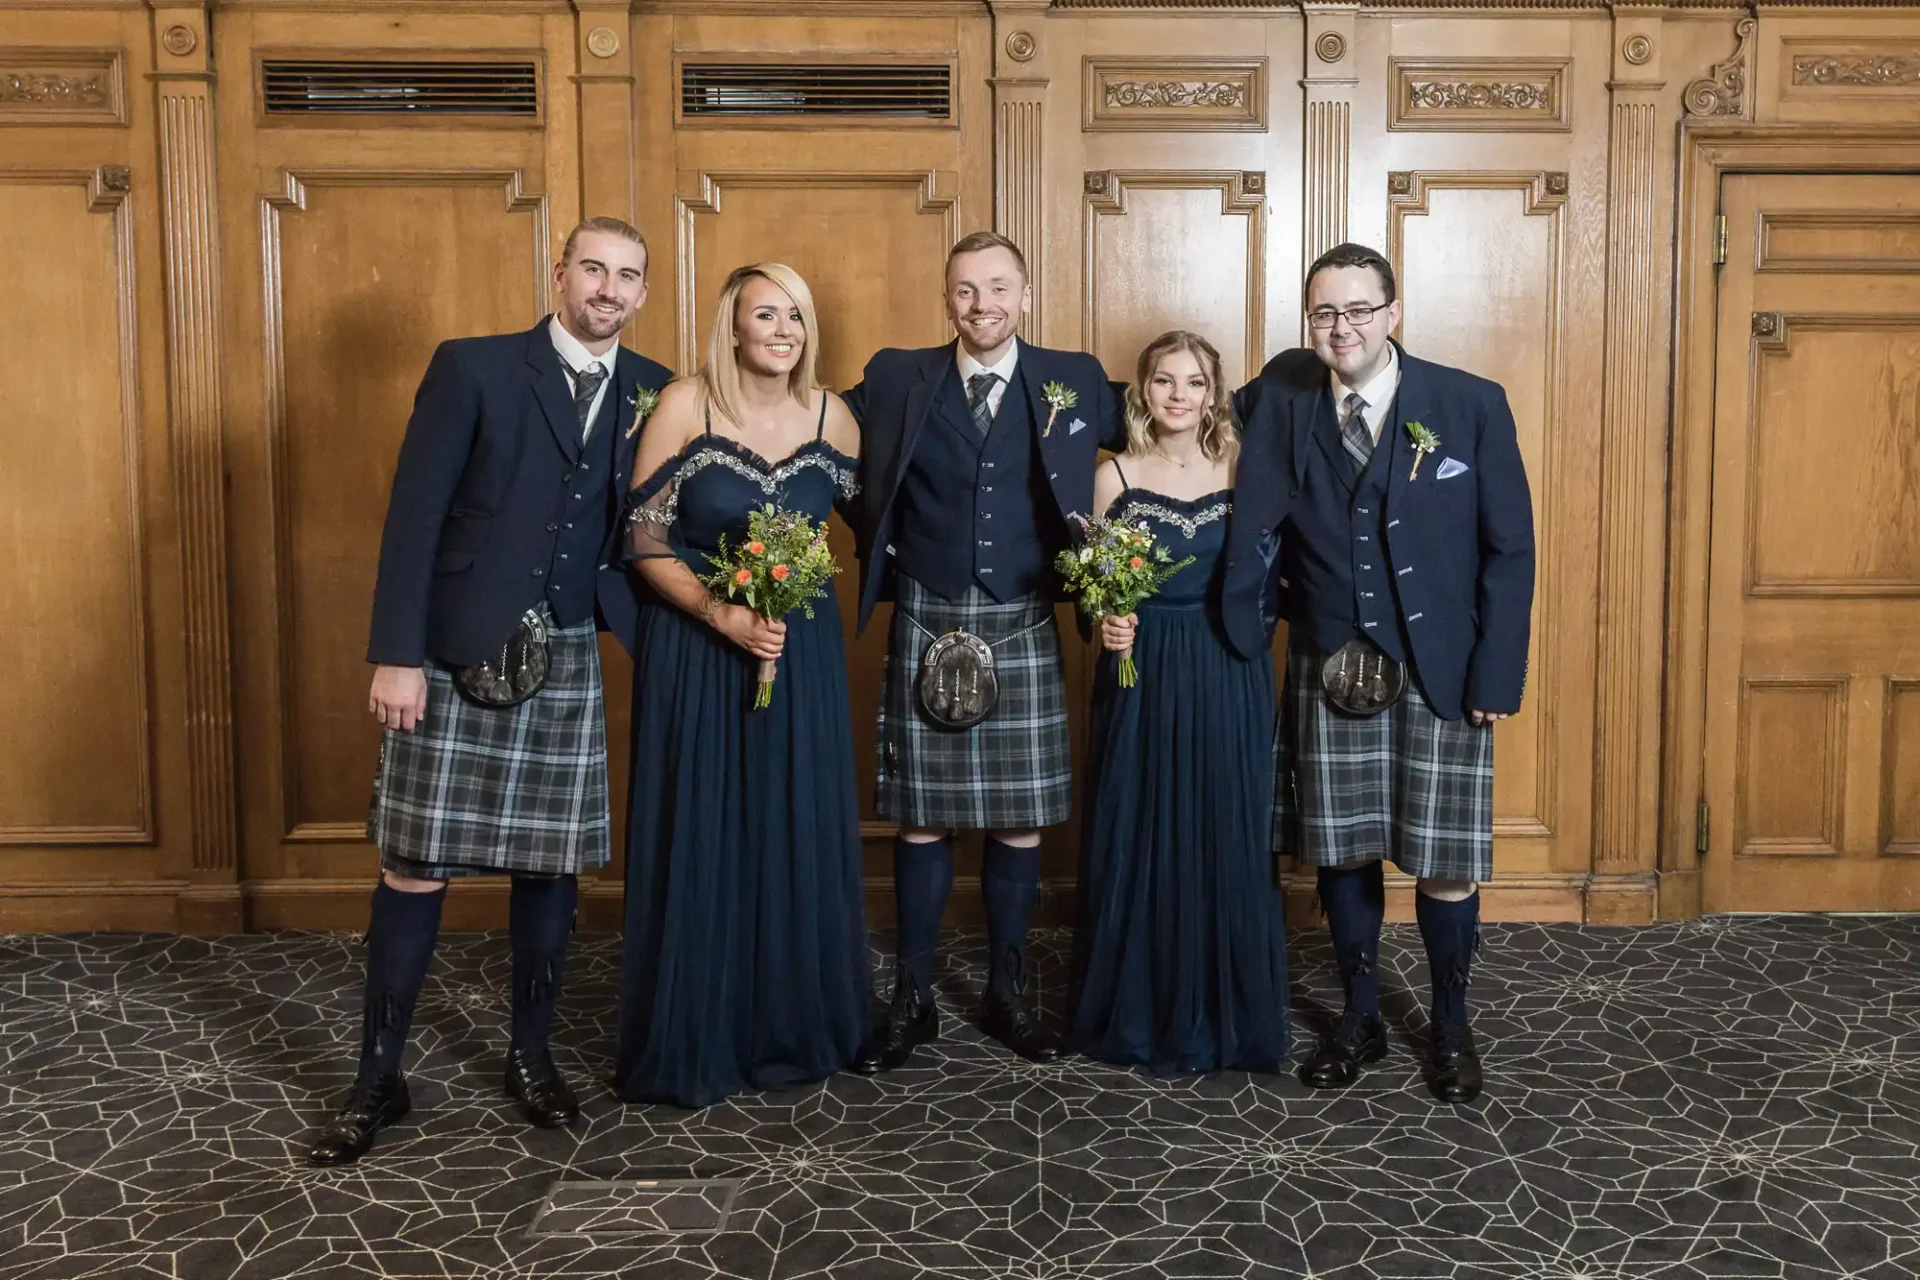 Five people in formal attire with kilts and dresses posing together at a wedding in a wood-paneled hall.